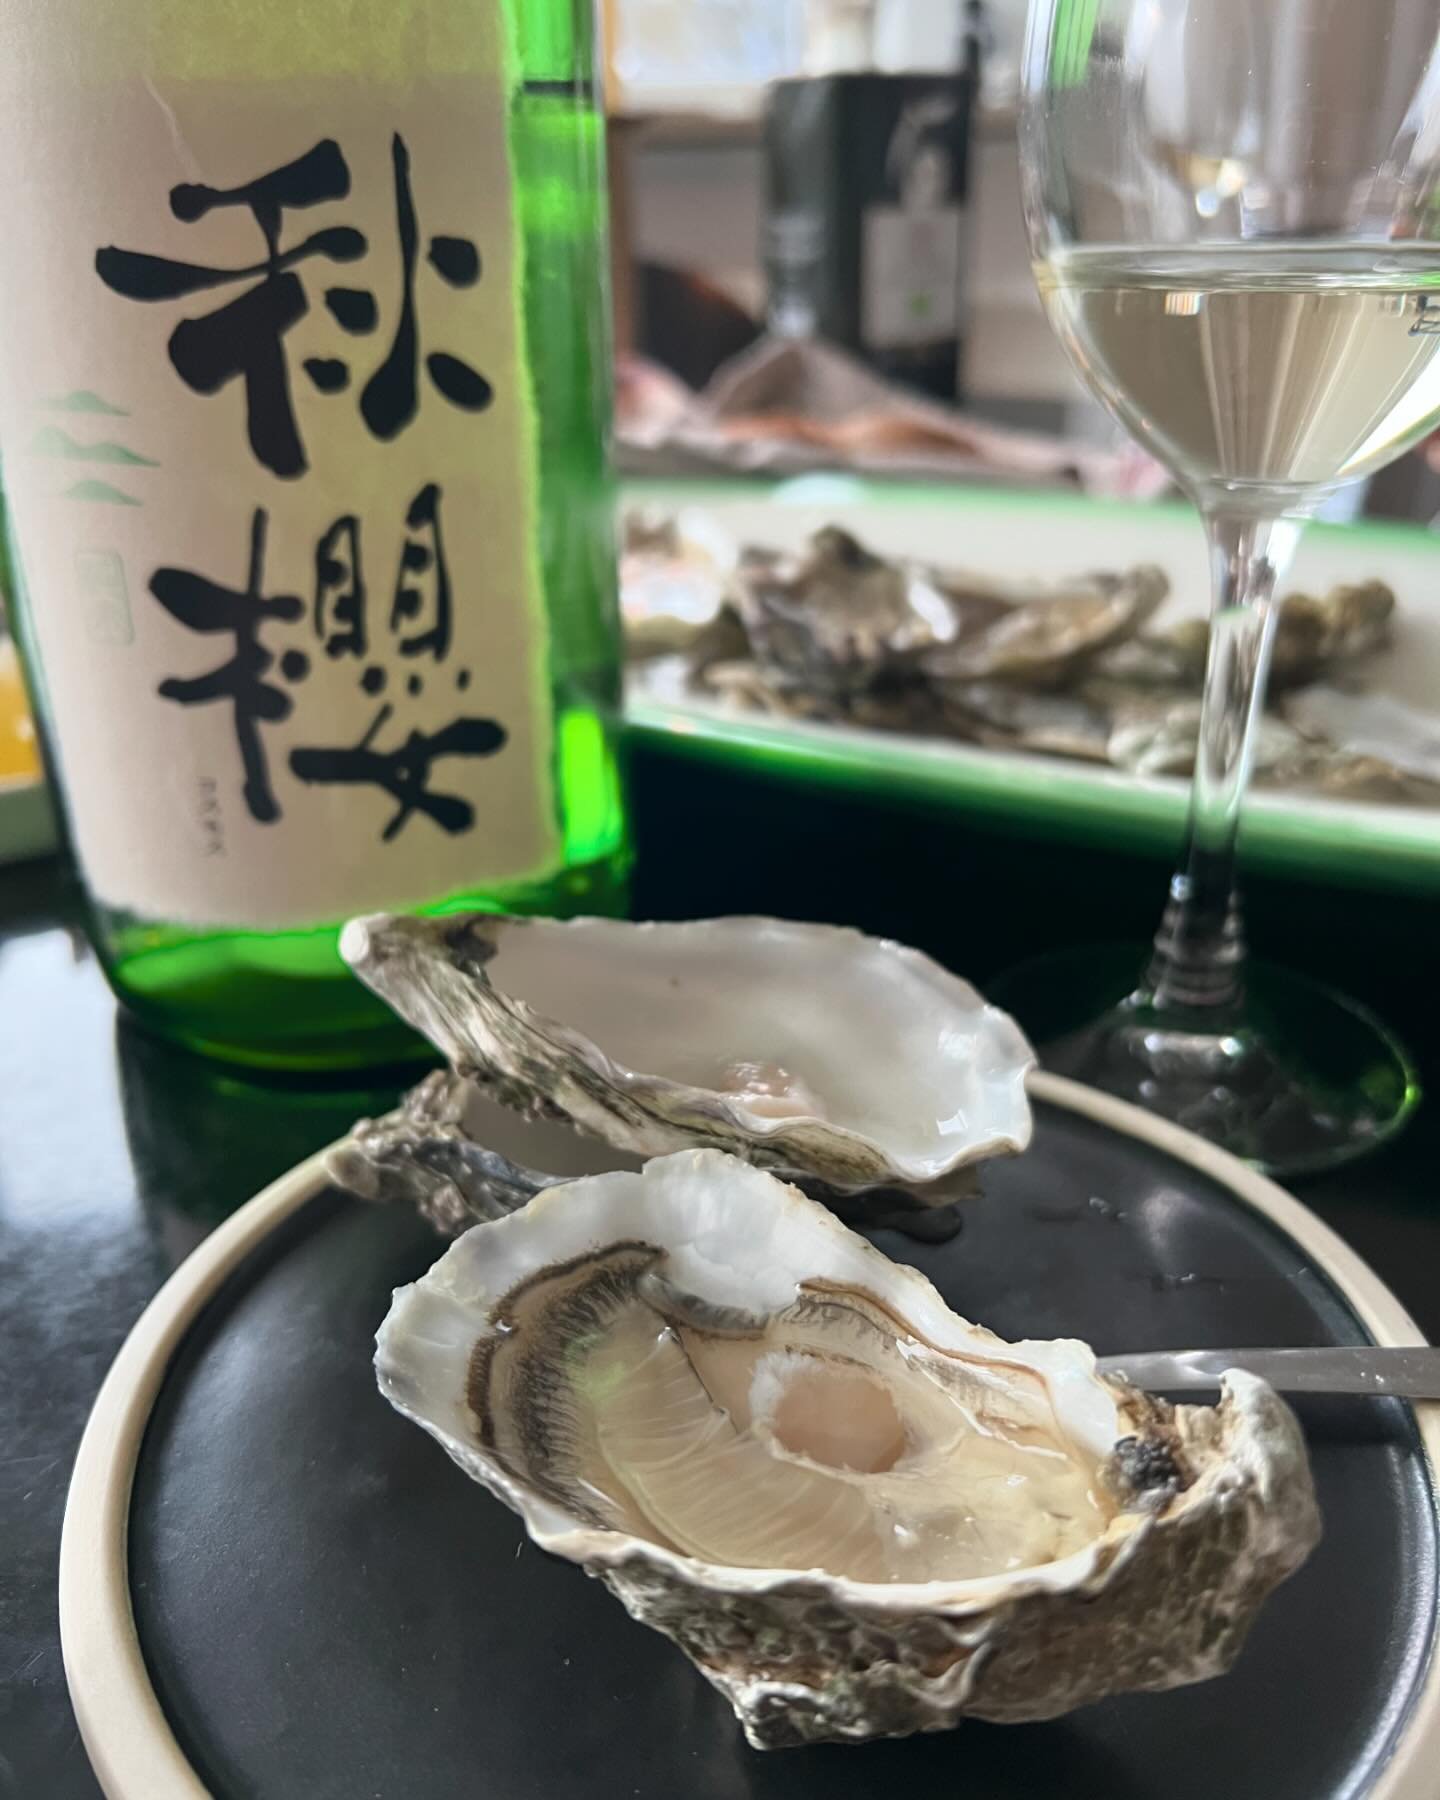 🍶🦪 🍶🦪 🍶🦪 OYSTERS AND JAPANESE SAKE IS A GOOD MATCH 🍶🦪 🍶🦪 🍶🦪

🍶The sake is Fukucho Cosmos Junmai in the traditional 1,8 L bottle ishoubin (Magnum). The brewery Fukucho is located in Hiroshima.

Junmai means pure rice sake is a quality mar